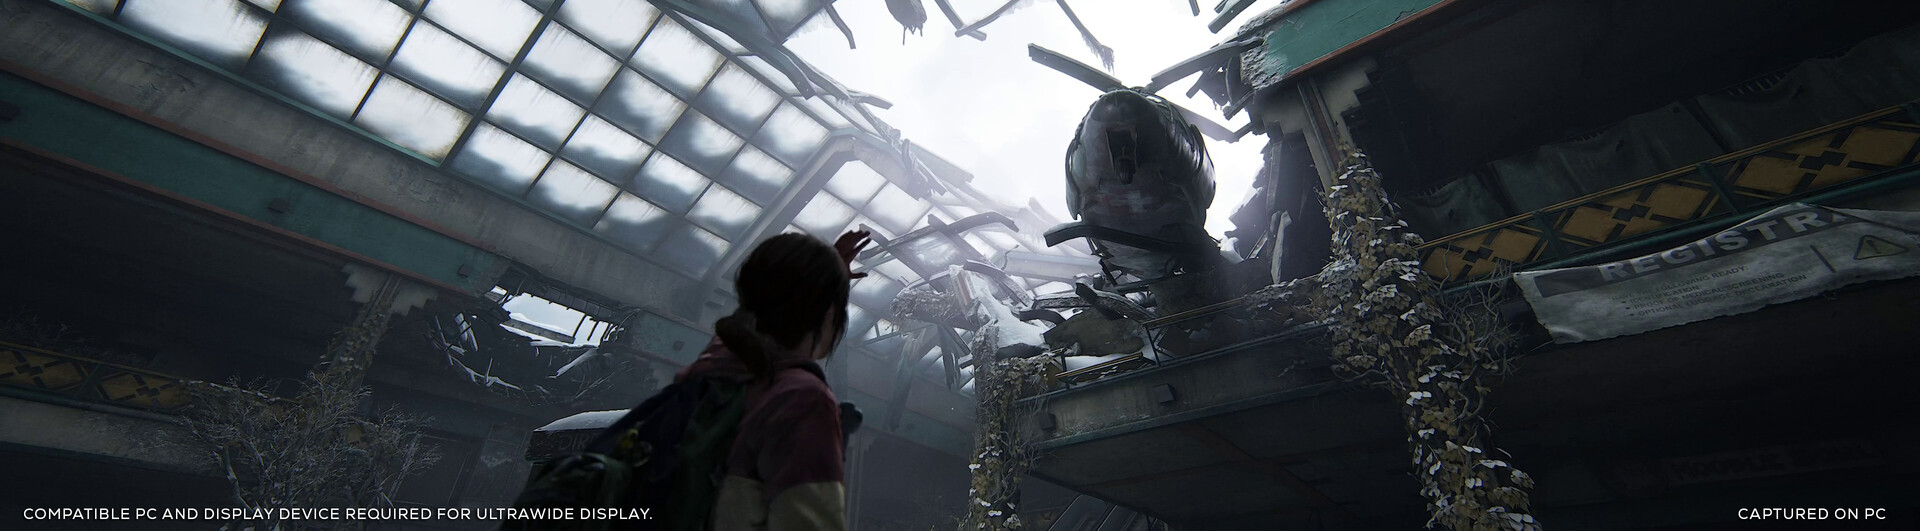 The Last of Us Part 1 PC: where to buy the game - Polygon